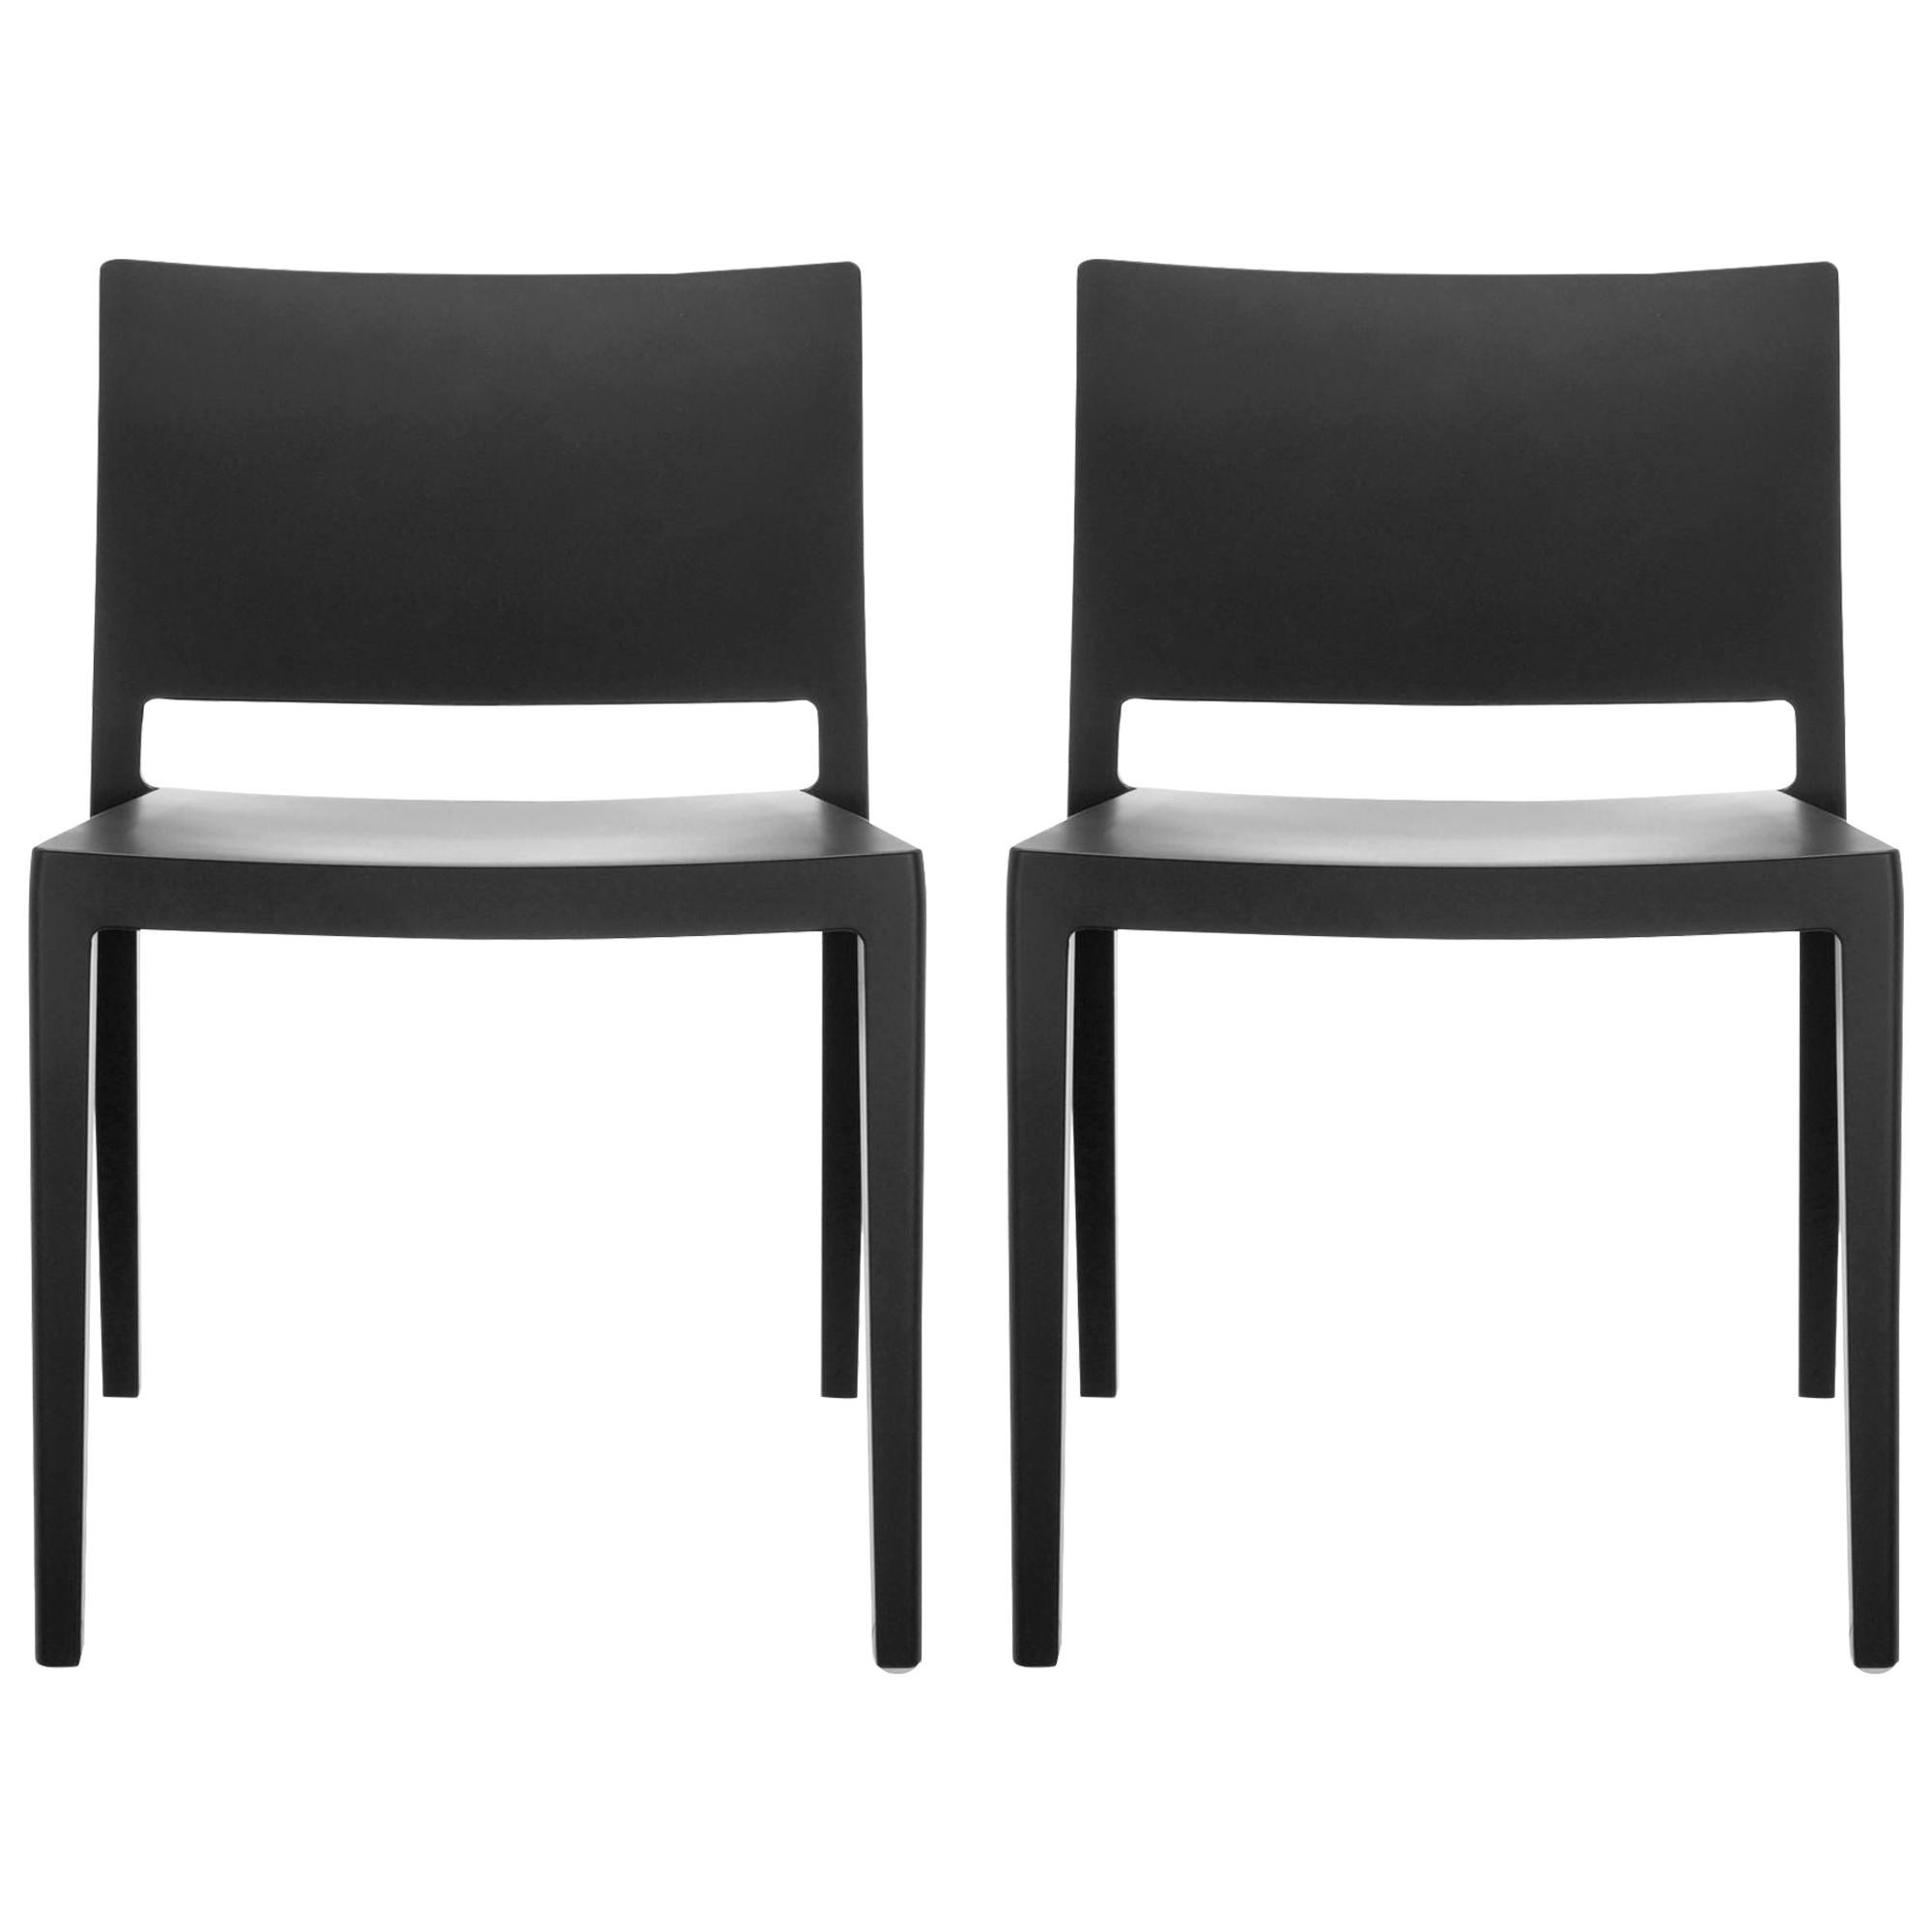 Set of 2 Kartell Lizz Mat Chairs in Black by Patricia Urquiola